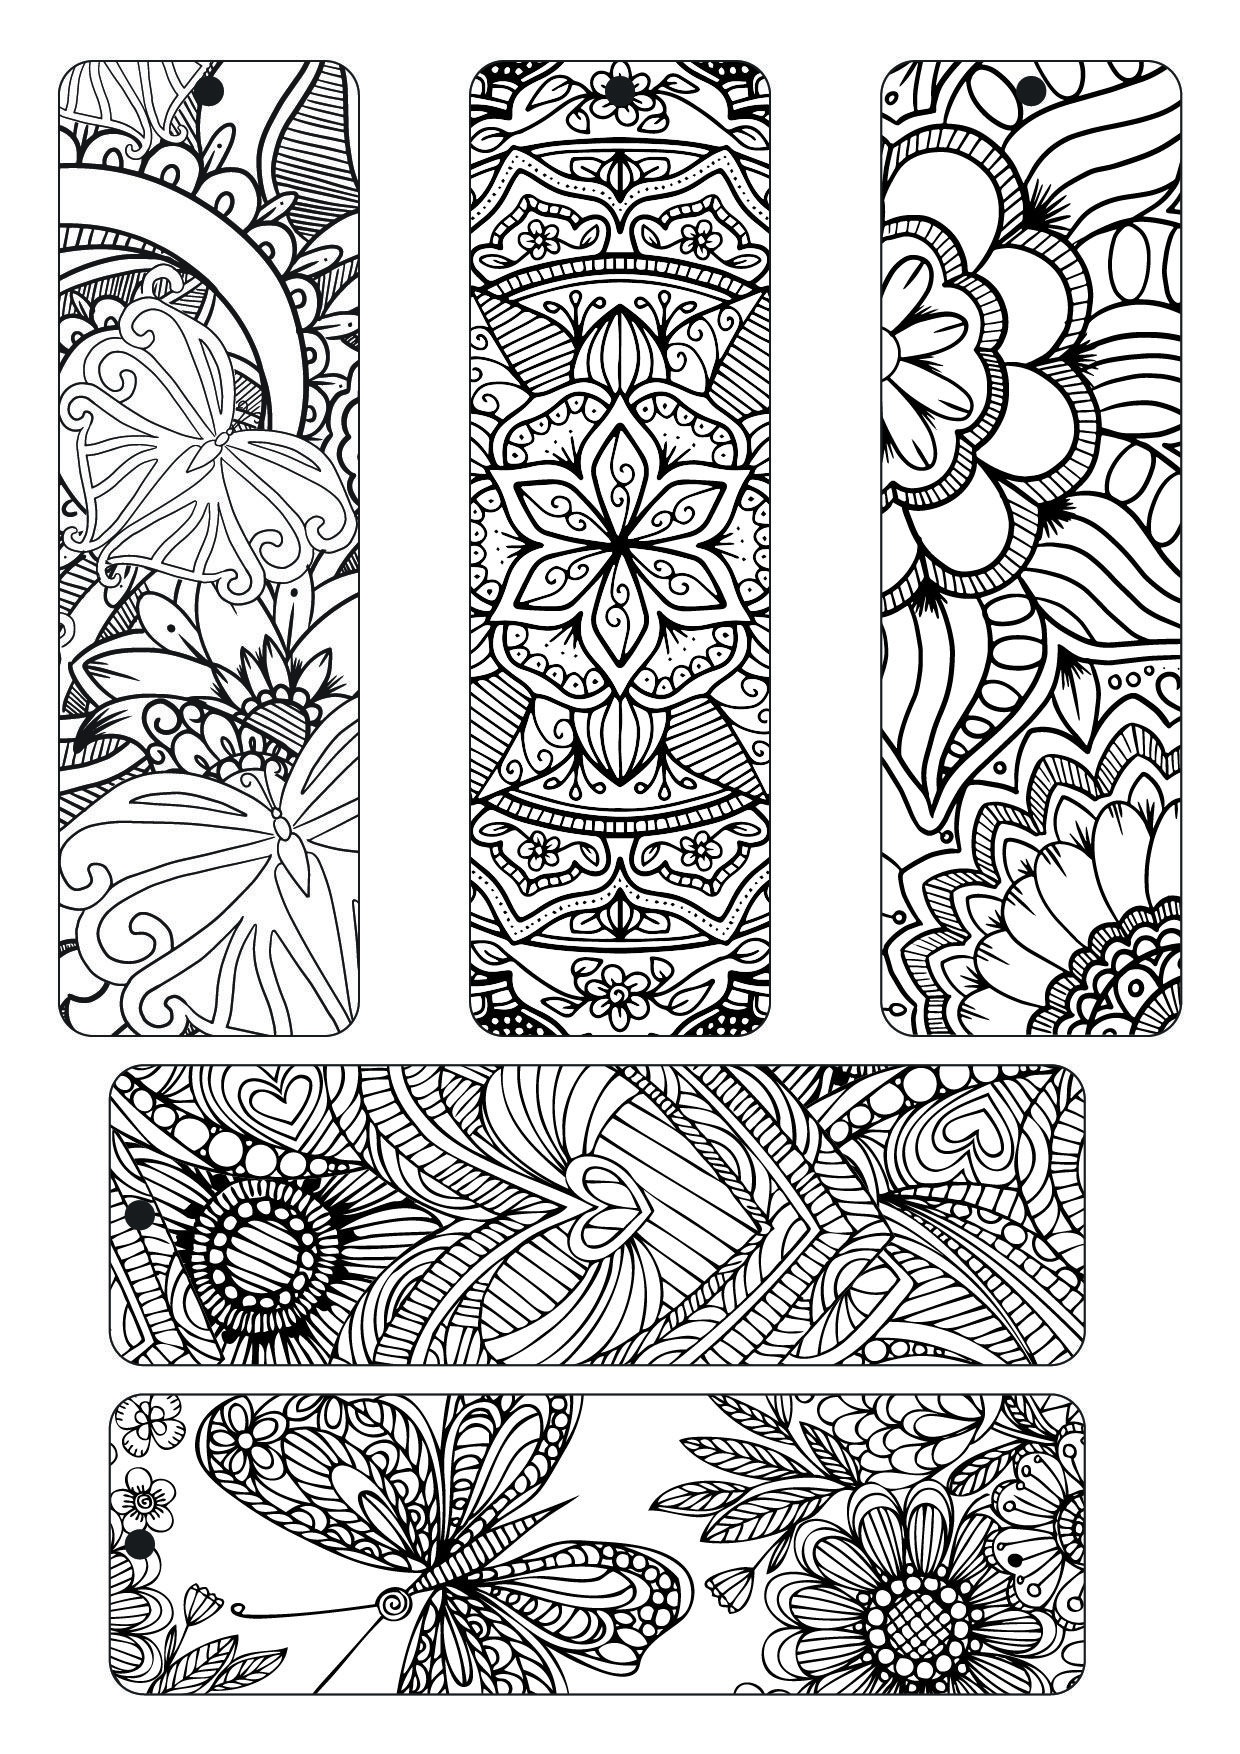 Free Coloring Plate Adult With Spectrum Noir More | Coloring - Free Printable Bookmarks To Color